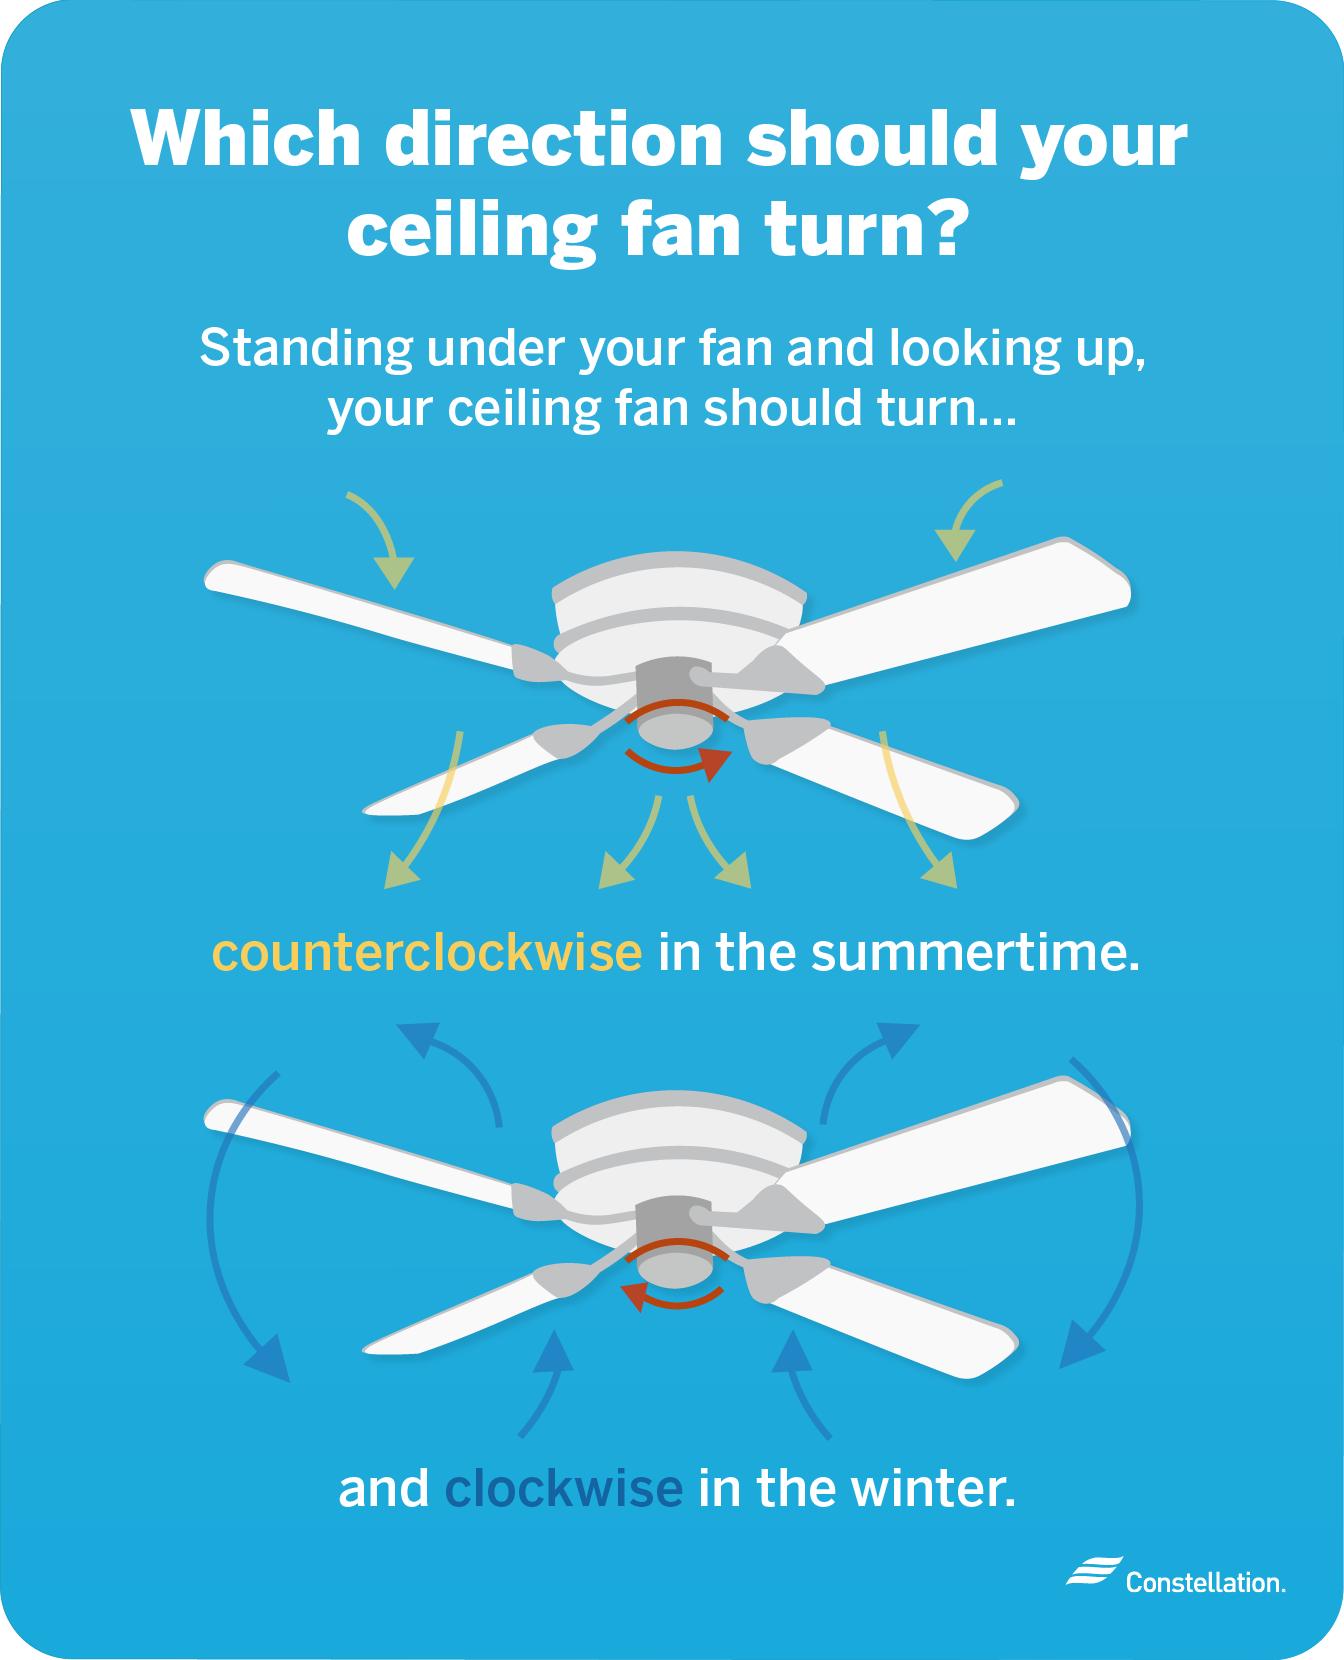 Your ceiling fan should turn counterclockwise in the summertime and turn clockwise in winter